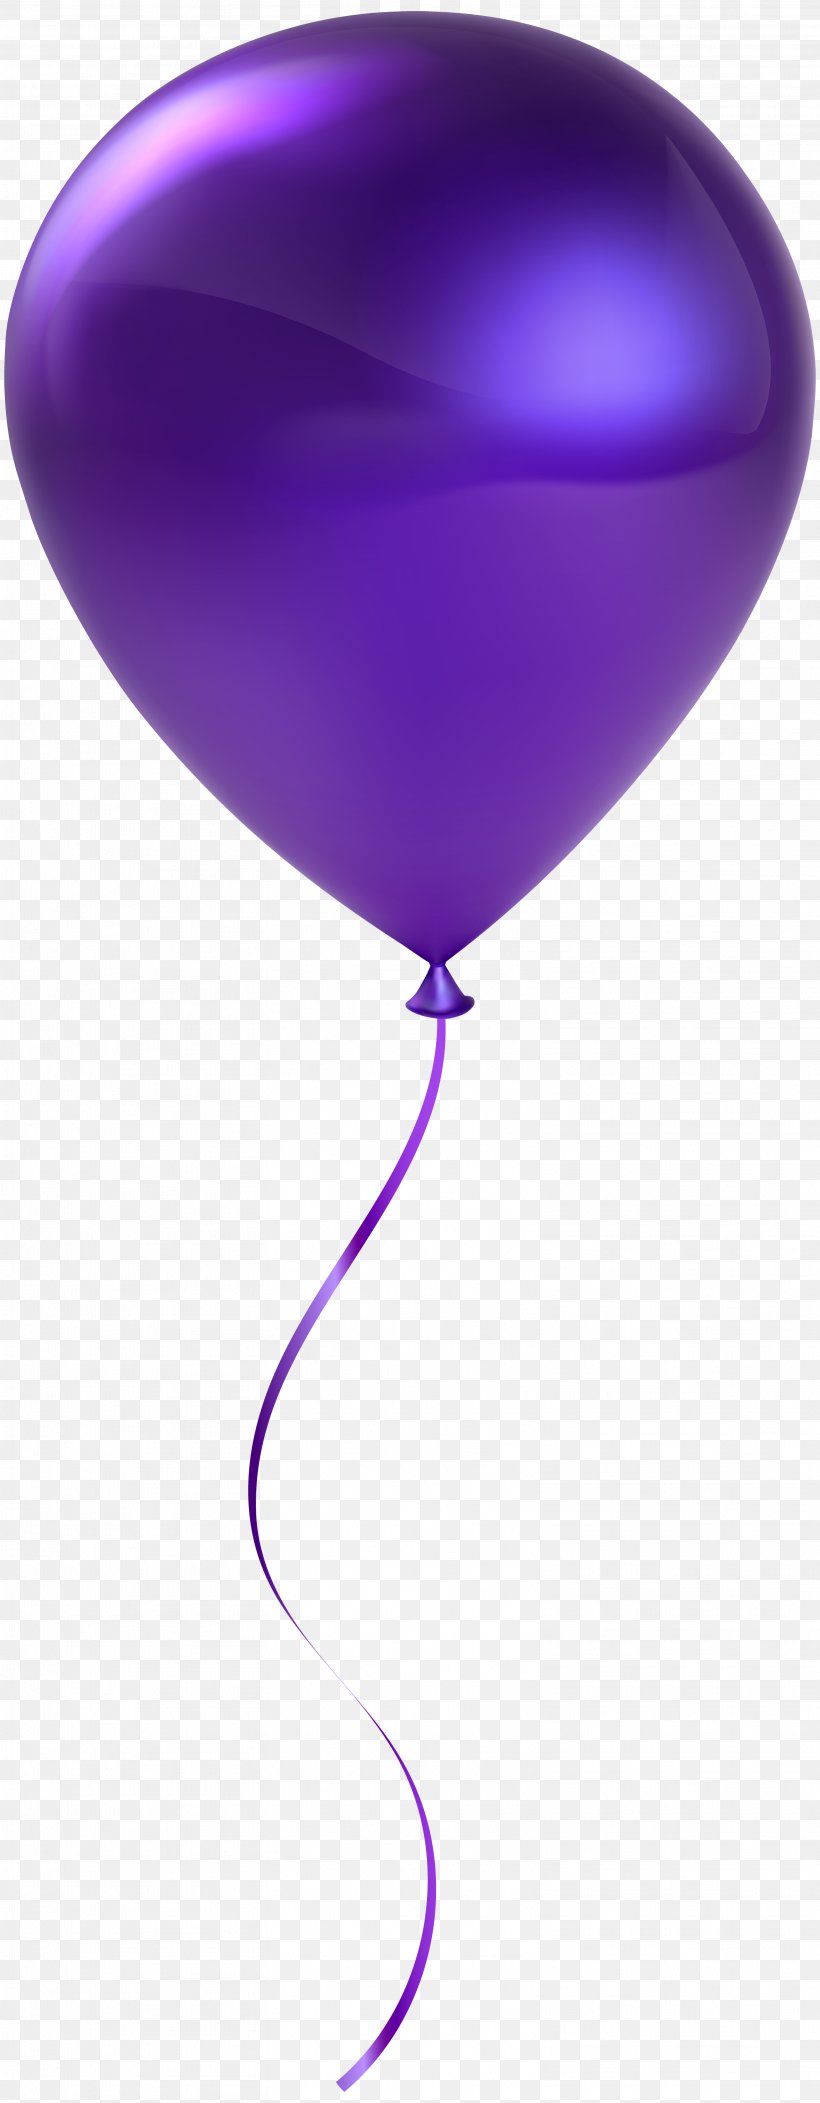 Purple Balloon, PNG, 3118x8000px, Balloon, Birthday, Gift, Lavender, Lilac Download Free